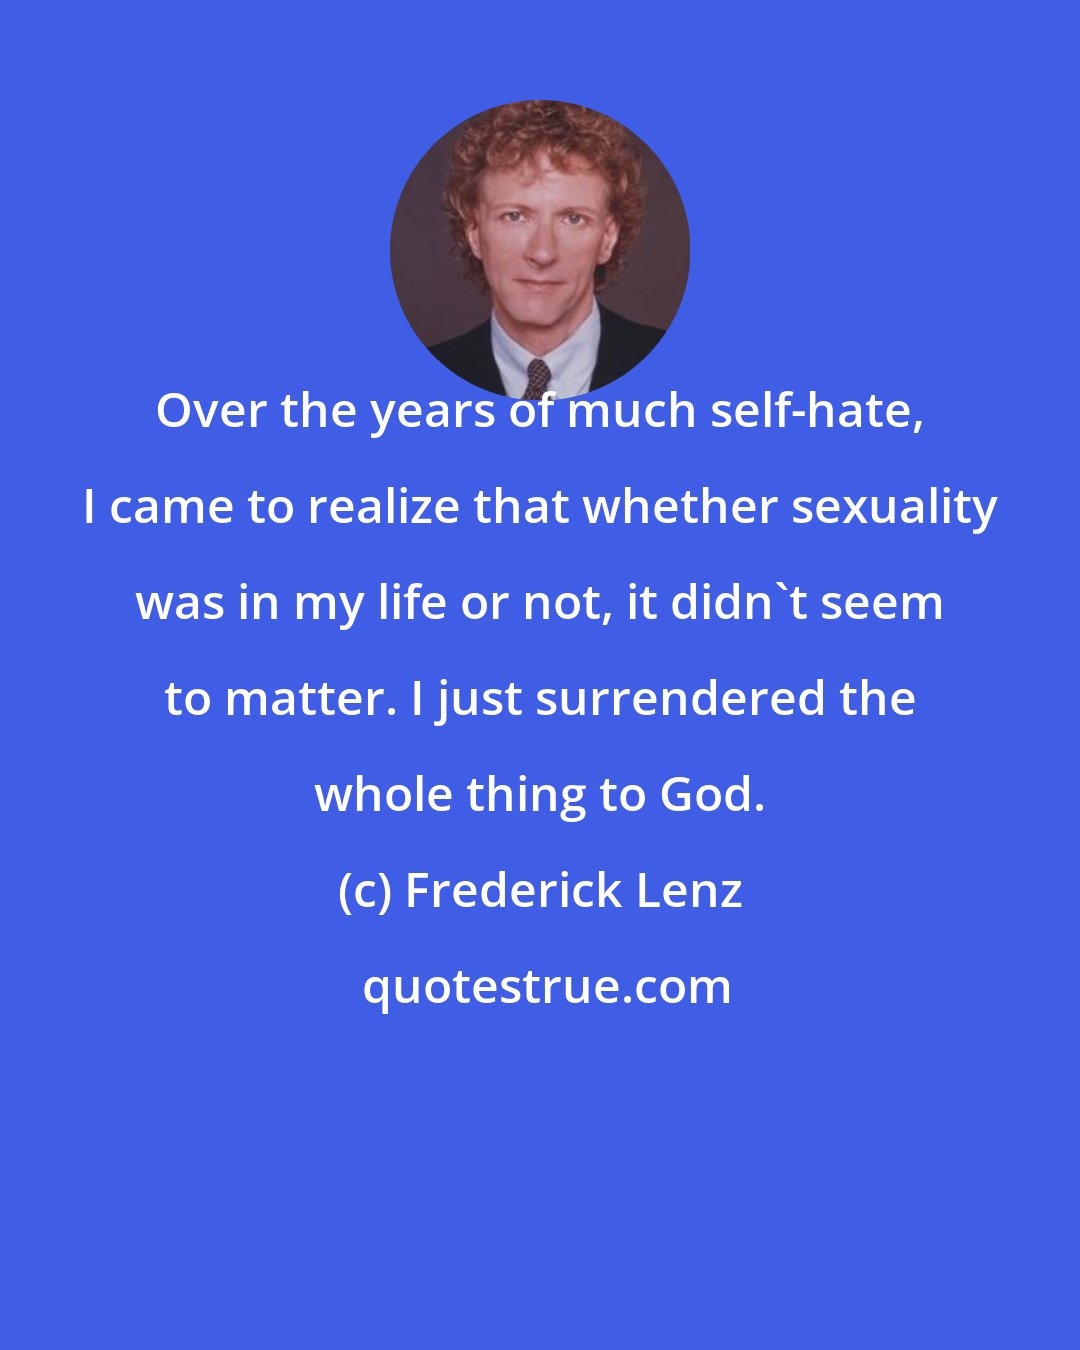 Frederick Lenz: Over the years of much self-hate, I came to realize that whether sexuality was in my life or not, it didn't seem to matter. I just surrendered the whole thing to God.